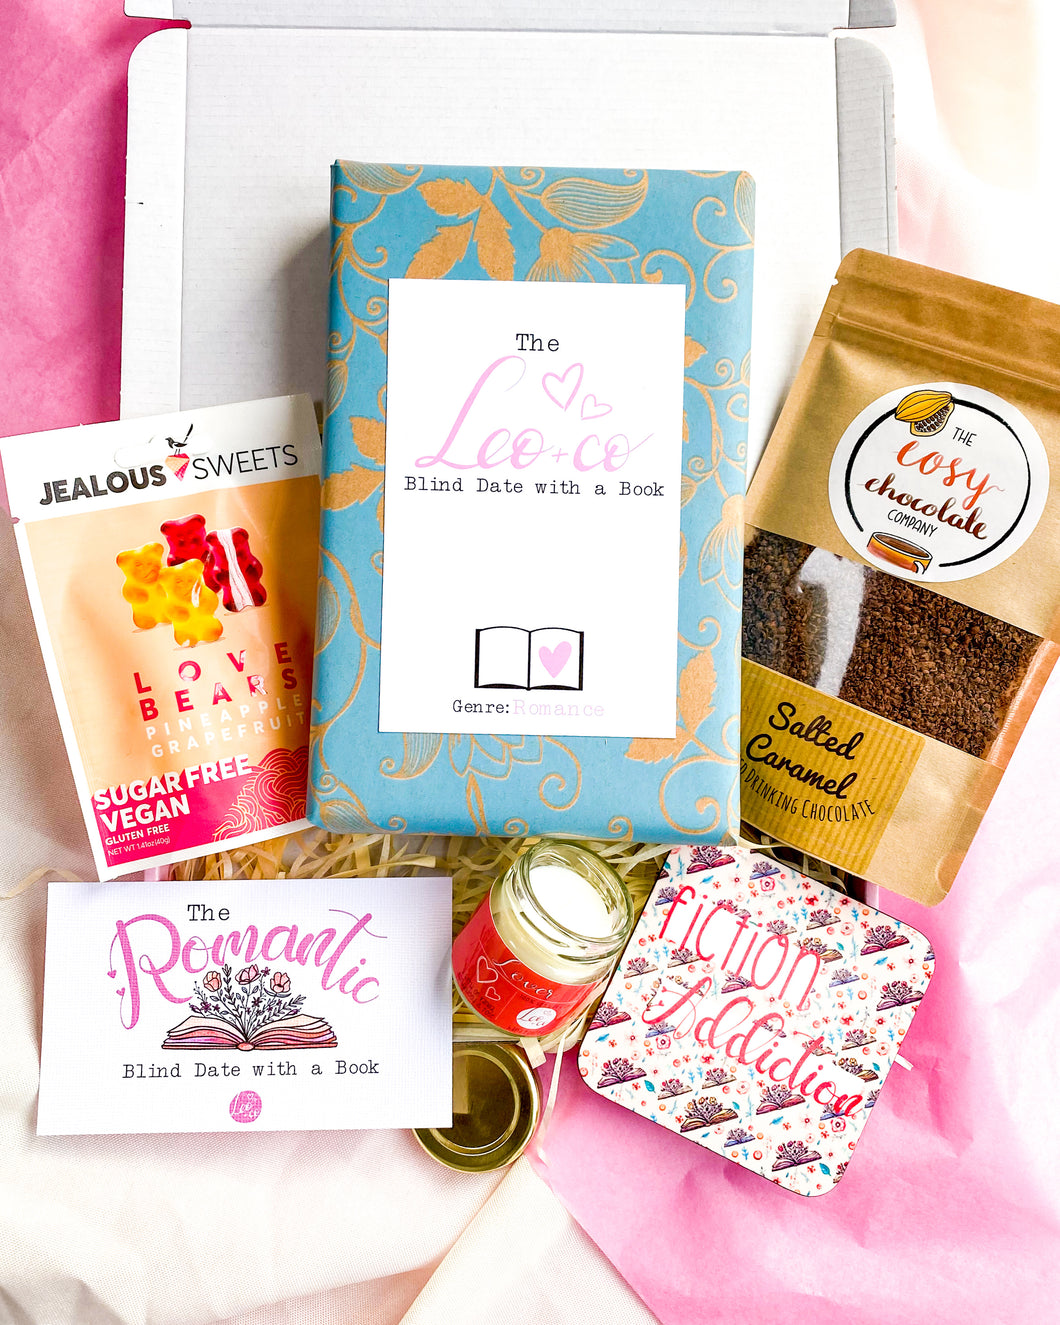 The Romantic Blind Date with a Book (a romance book + 4 mystery goodies)